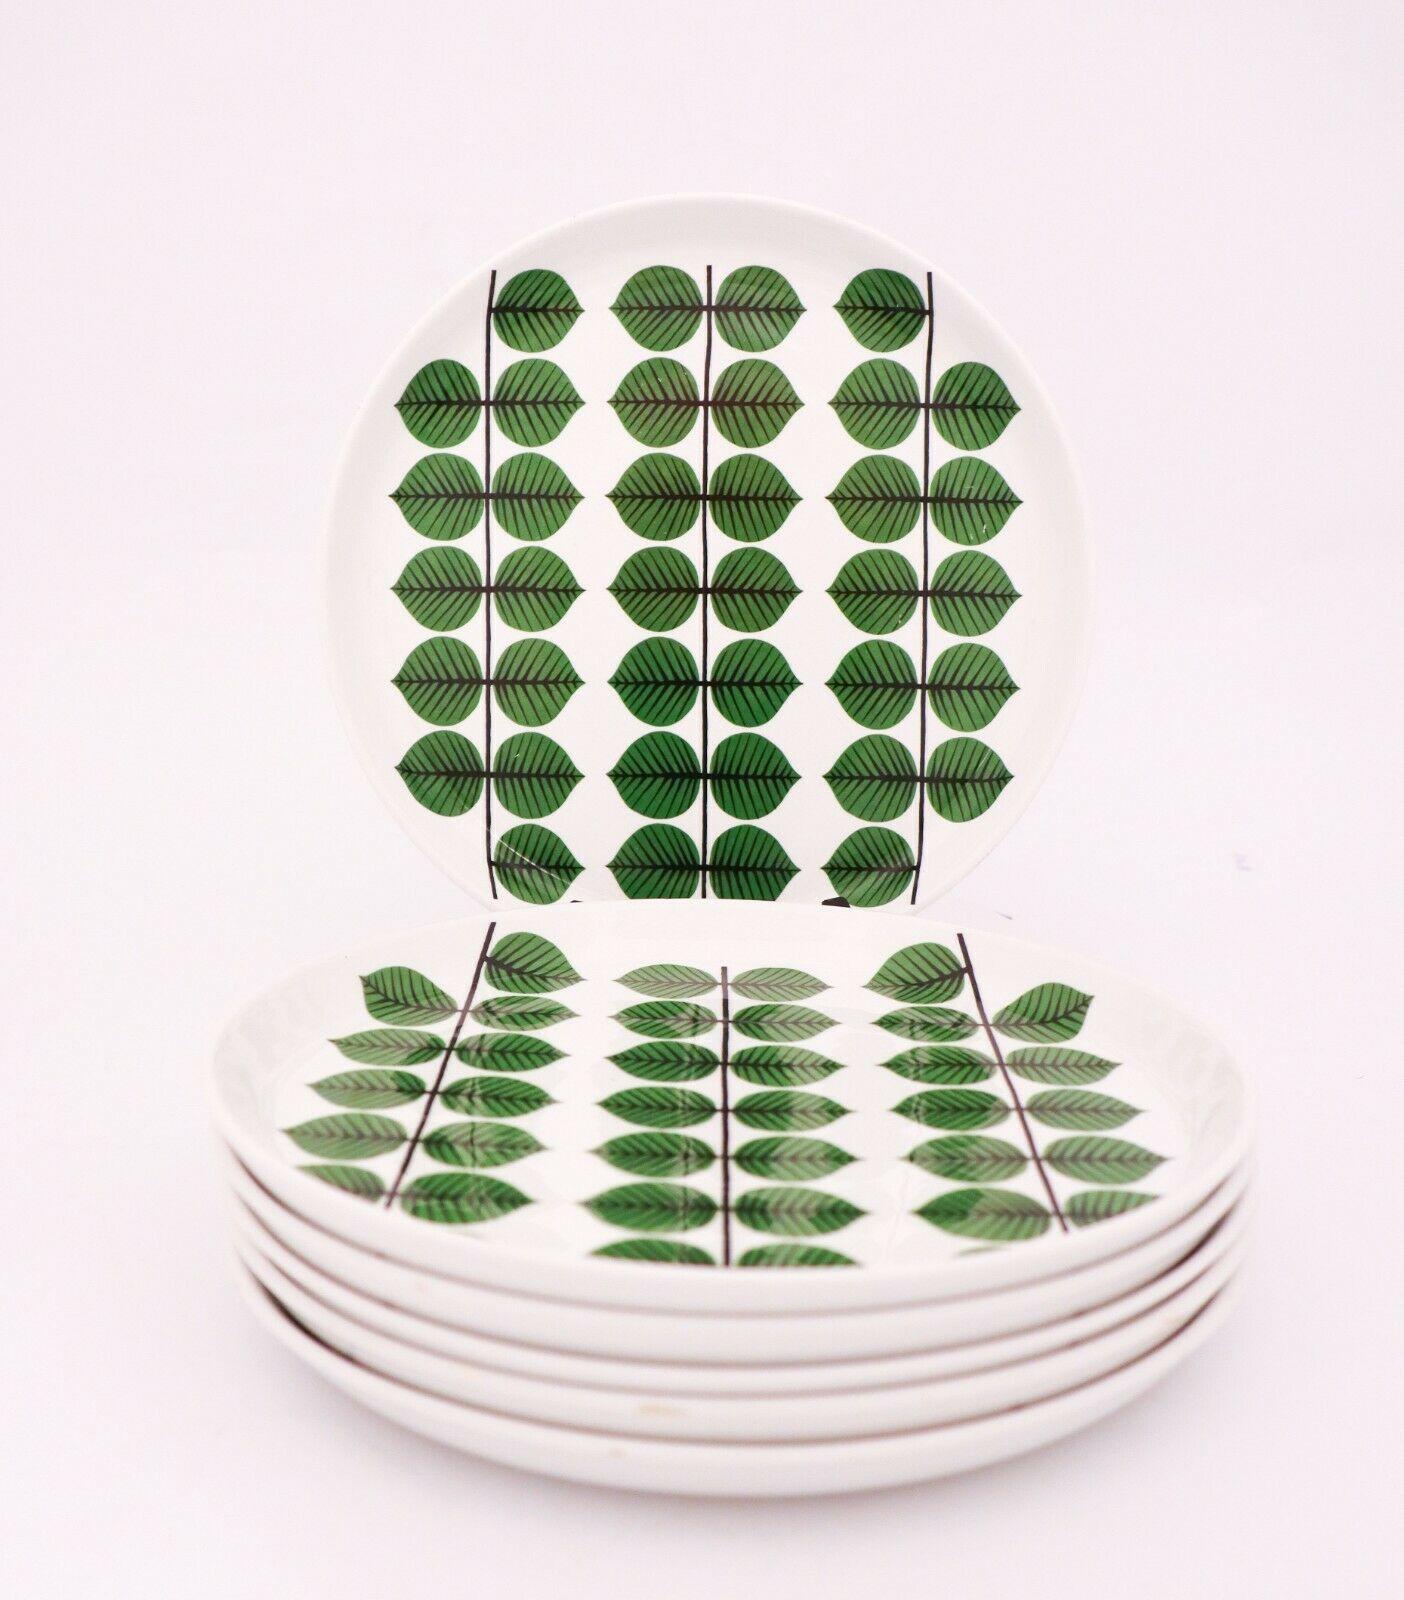 6 dinner plates in porcelain in the very famous pattern Berså designed by Stig Lindberg at Gustavsberg. They are 24.5 cm in diameter. They are in very good condition, looks like they never have been used, they have some minor marks from the